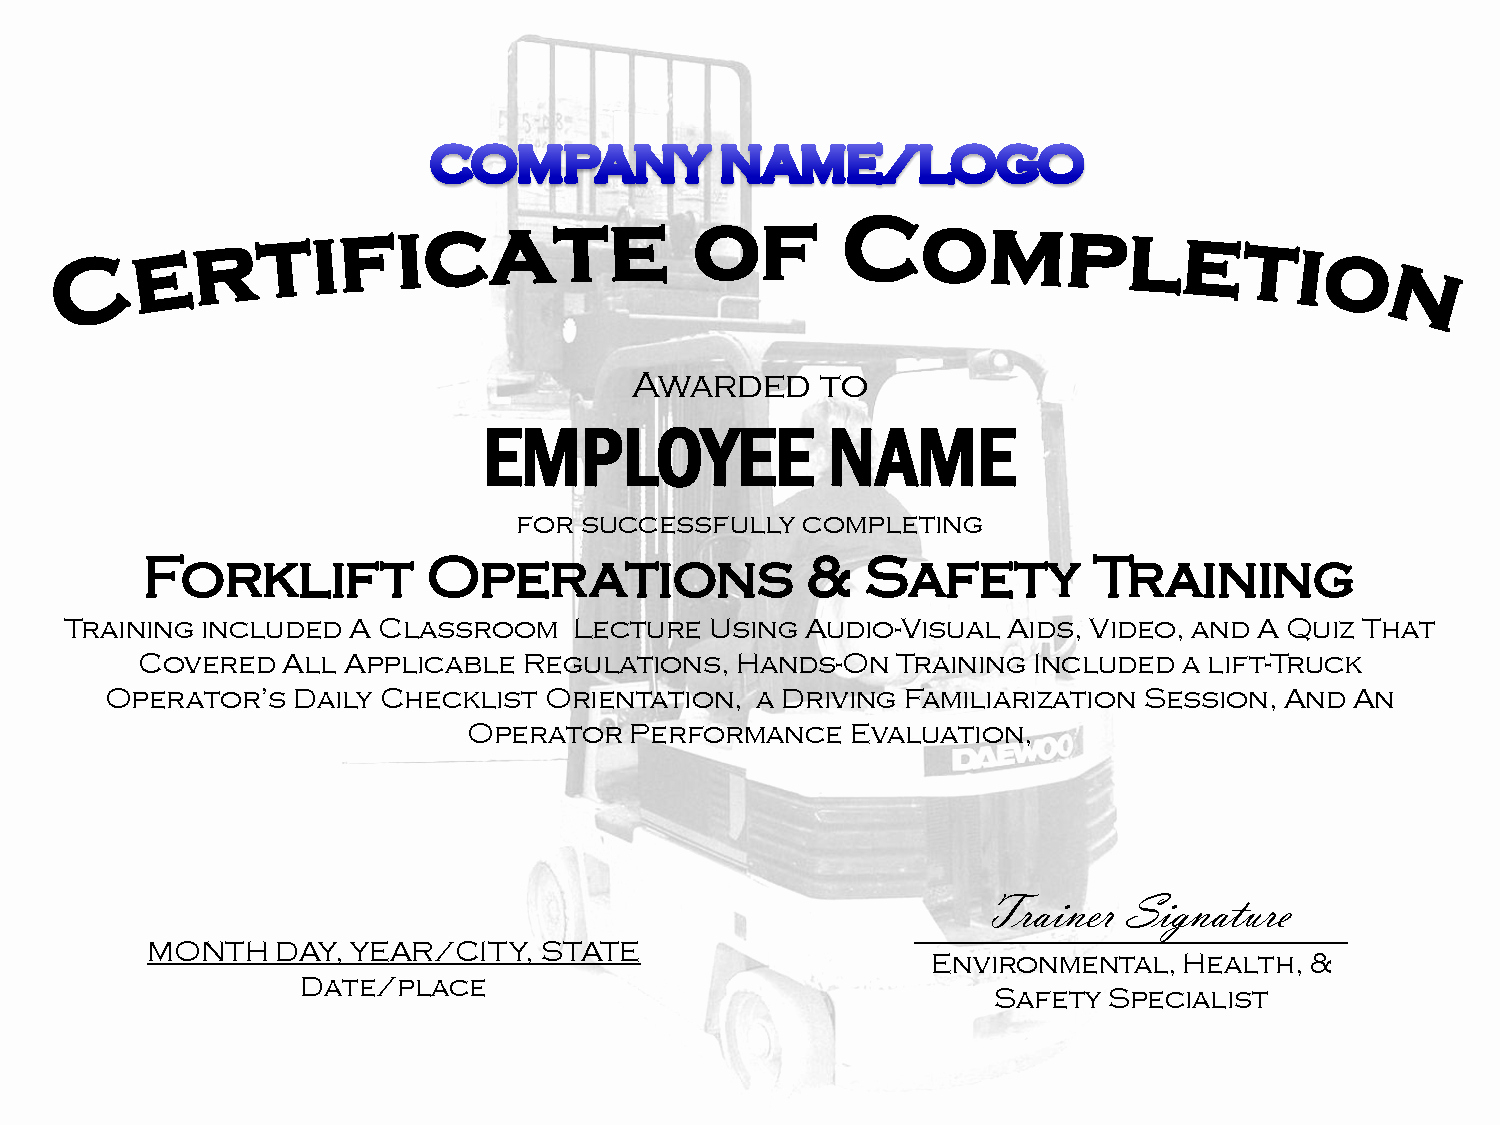 30 Forklift Operator Certificate Template | Pryncepality In Safe Driving Certificate Template